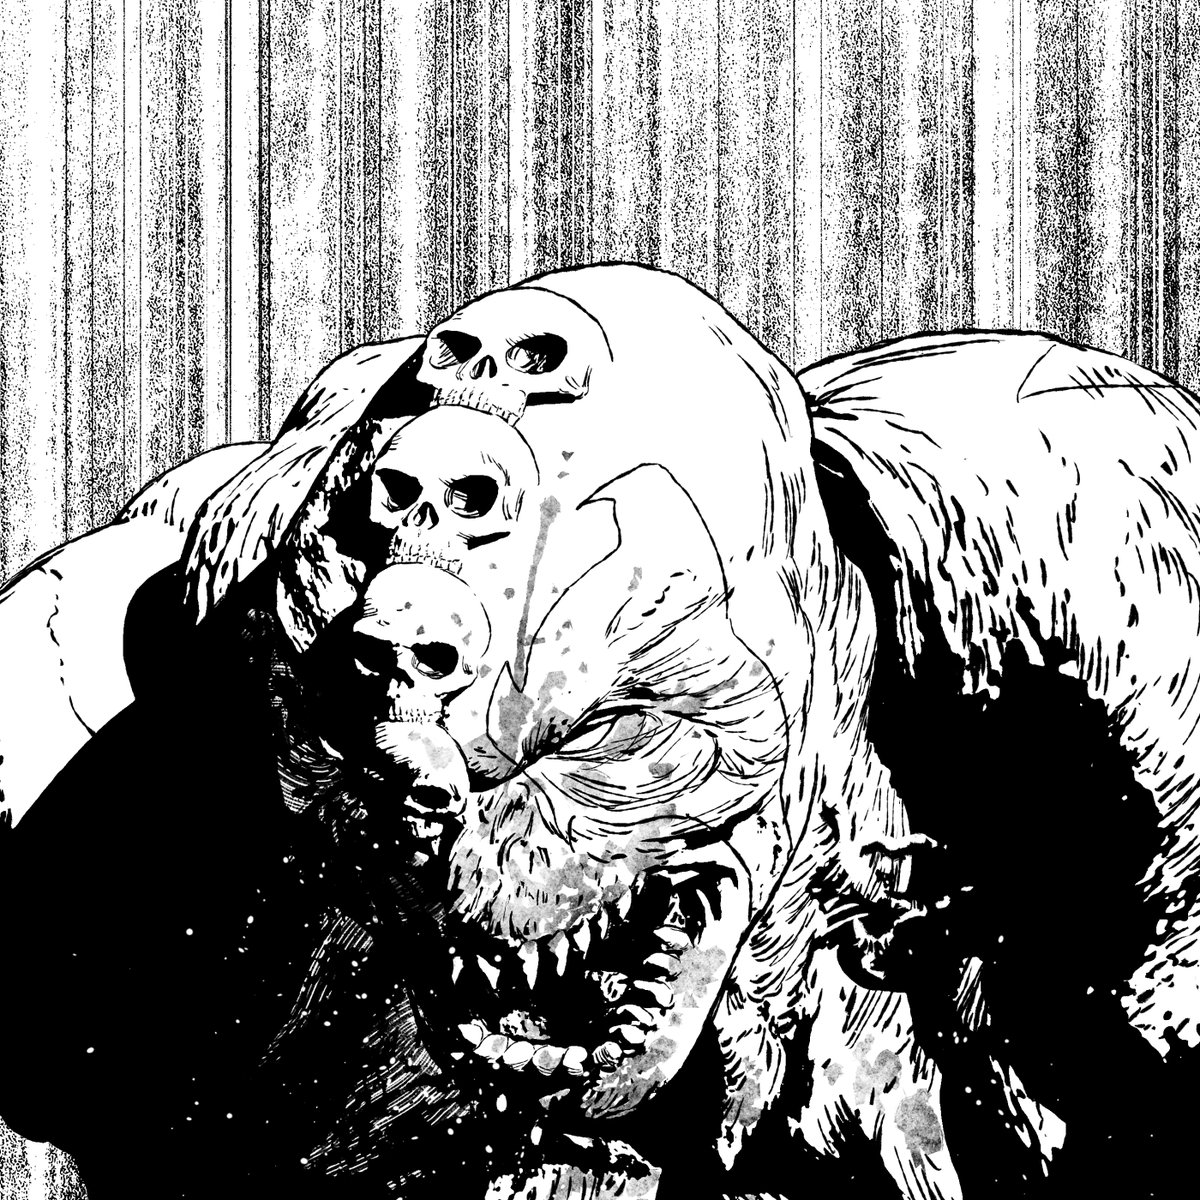 Angry Close-up from Monolith #2! 🔥
#spawn #imagecomics